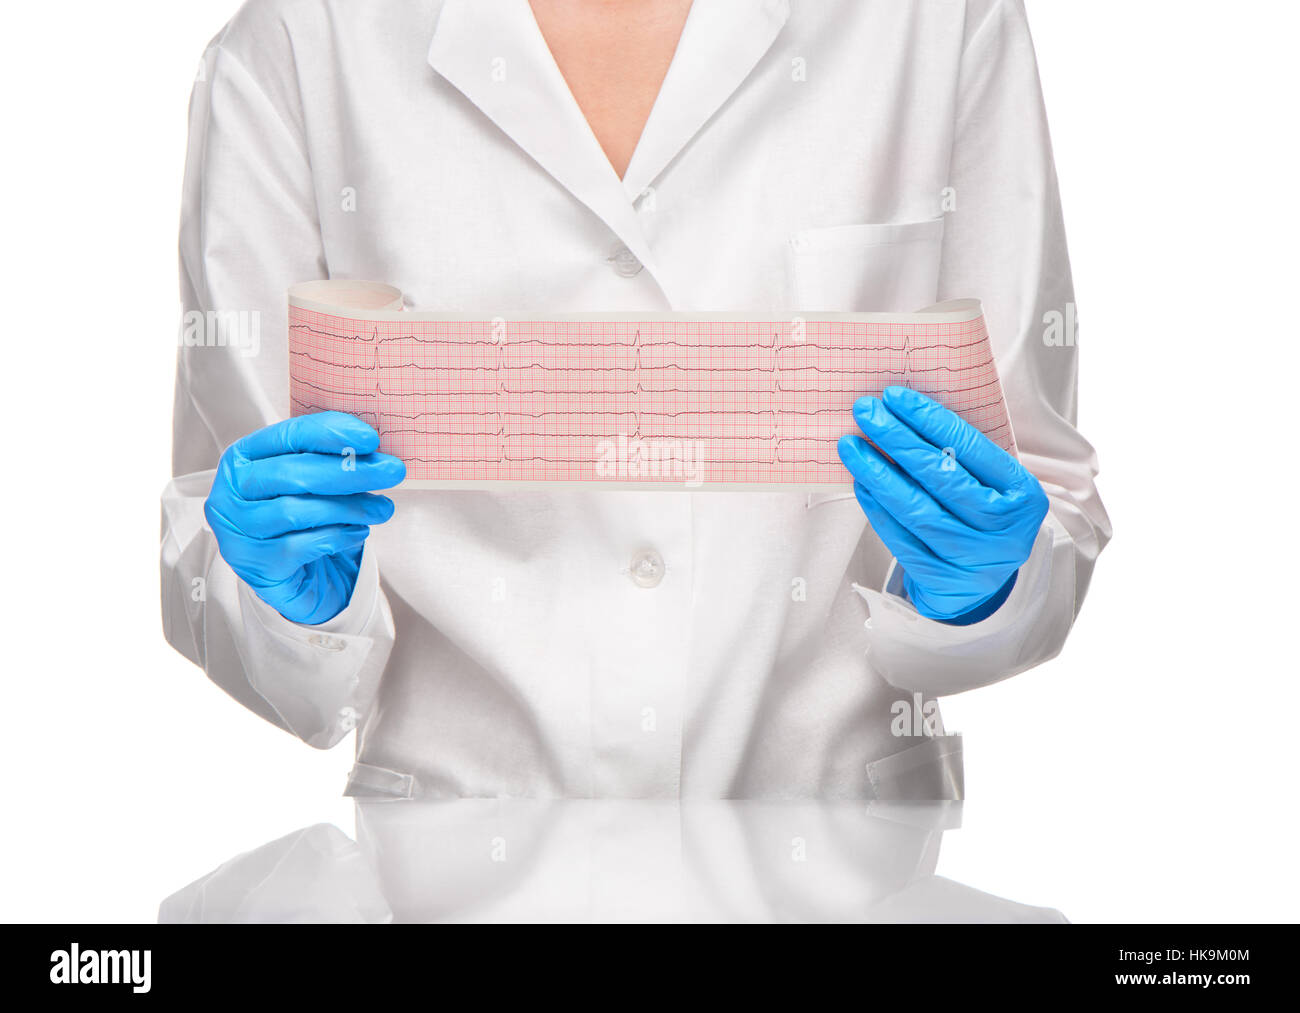 Female doctor in white gown and blue gloves holding ECG results on paper against white background Stock Photo